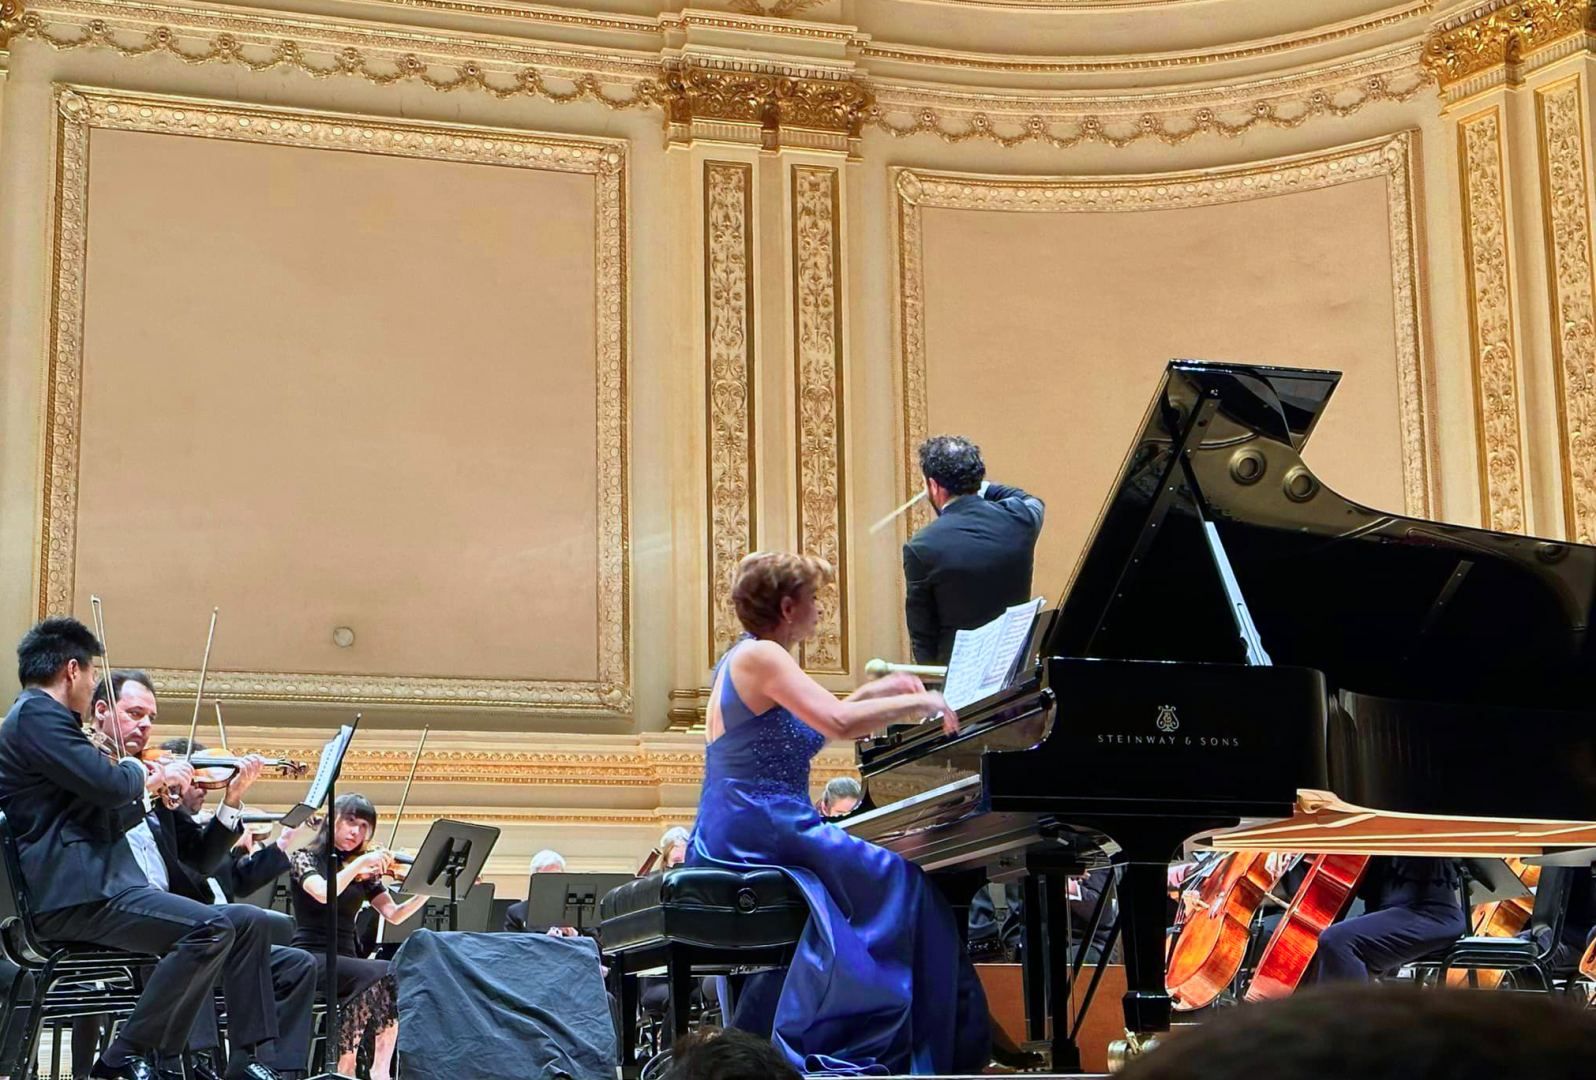 Music pieces by Azerbaijani, Jewish, Turkish composers sound in Carnegie Hall [PHOTO/VIDEO]